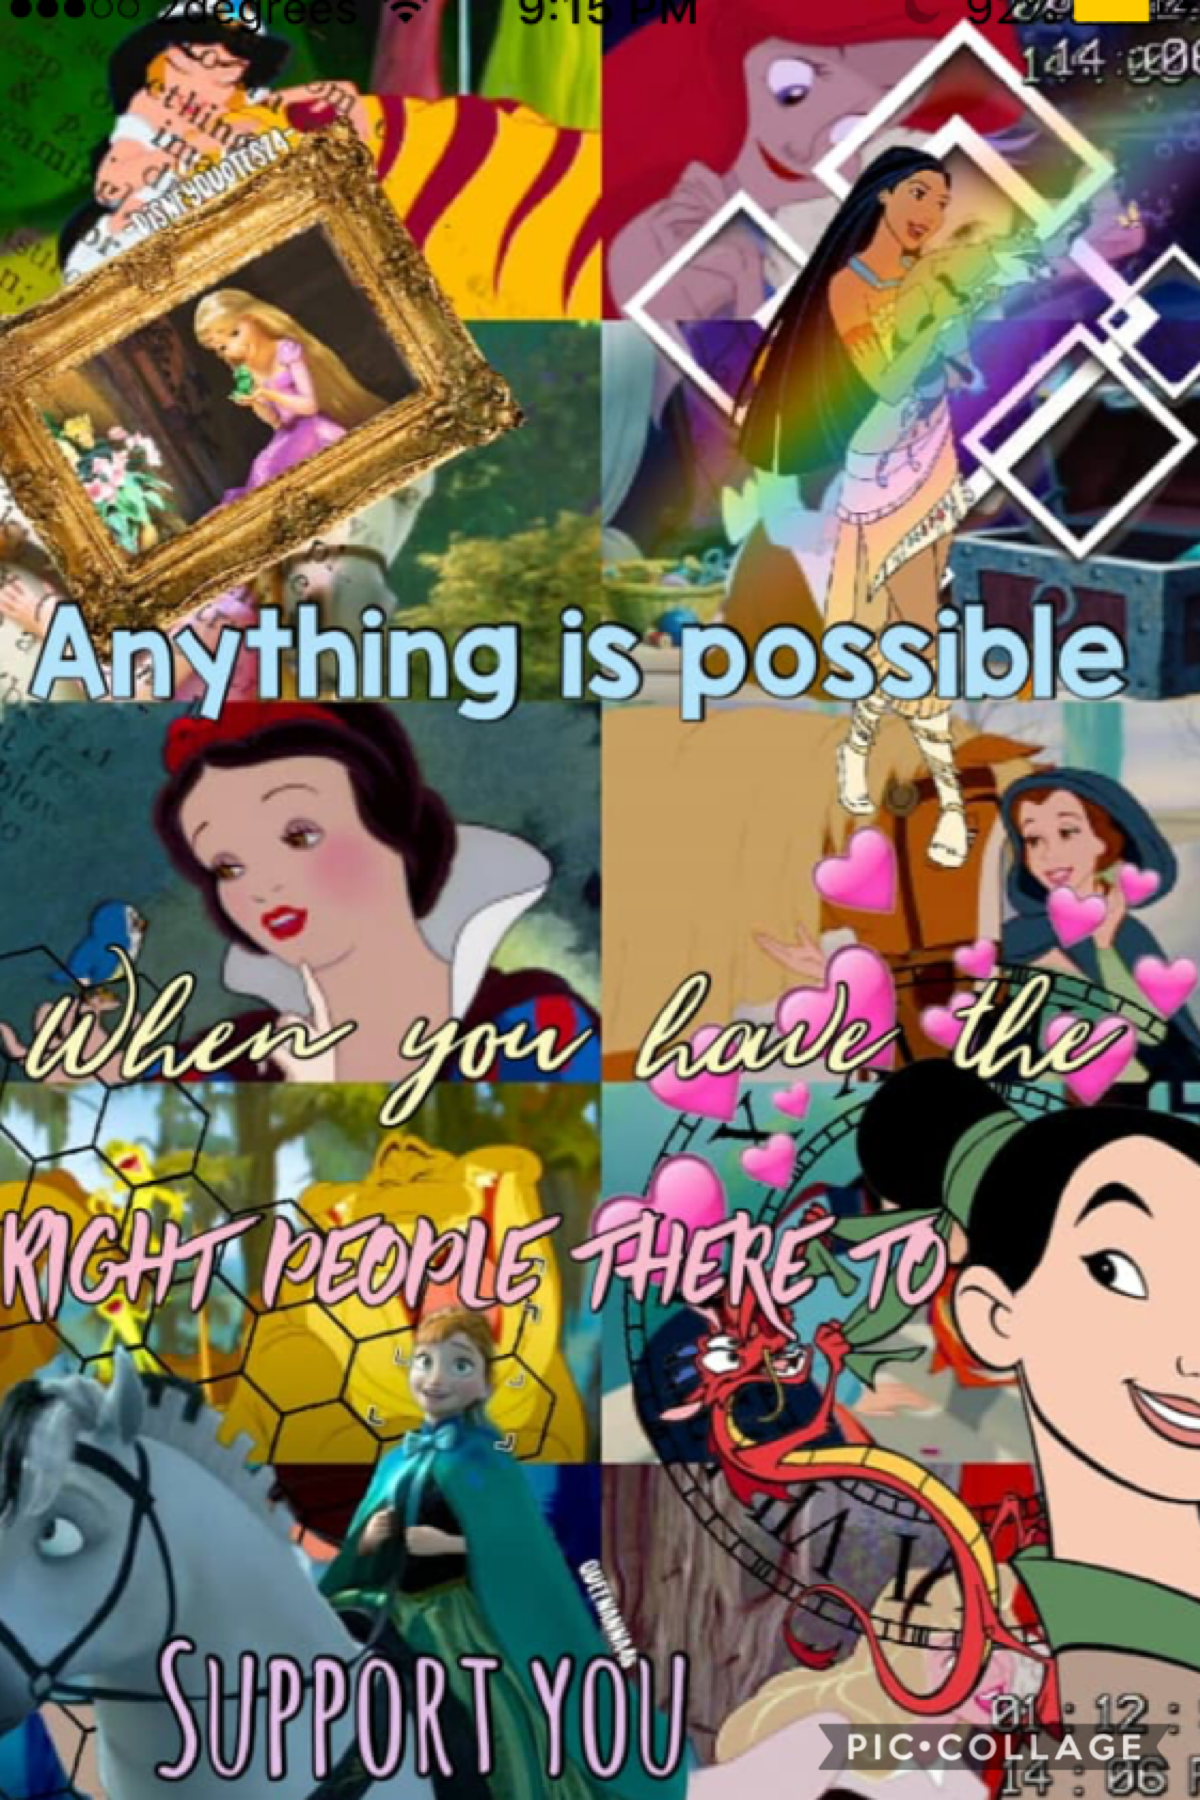 Disney collage and collaboration with Disney quotes24